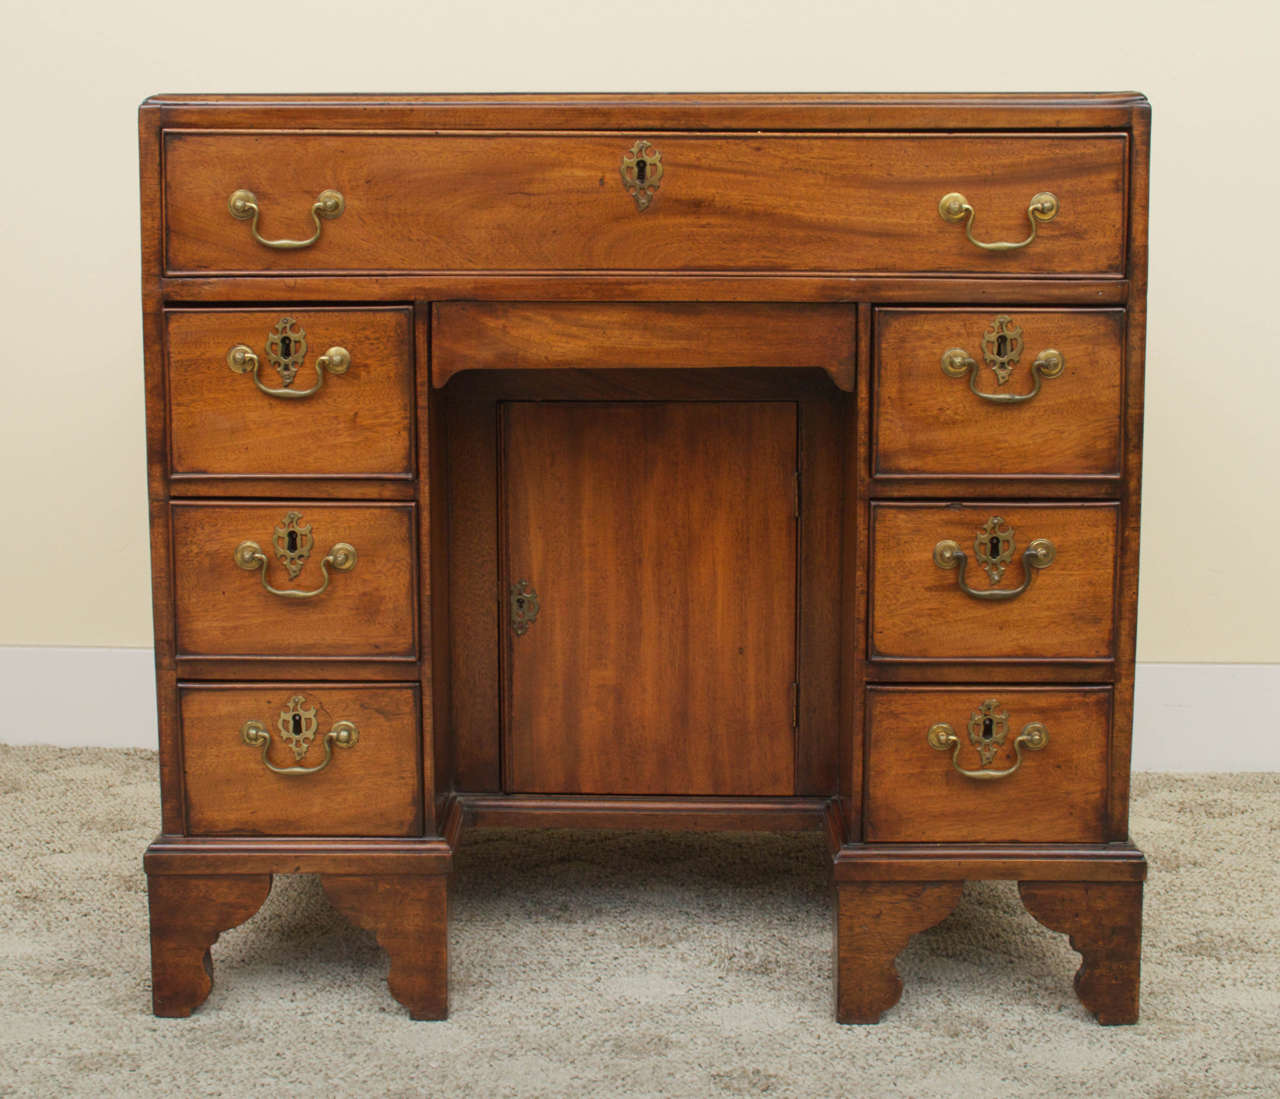 A stunning English, George II, solid mahogany kneehole desk. The crossbanded top is slightly warped due to age. There is one large beaded frieze drawer above a kneehole drawer and recessed cupboard that is flanked by six small beaded drawers. Both